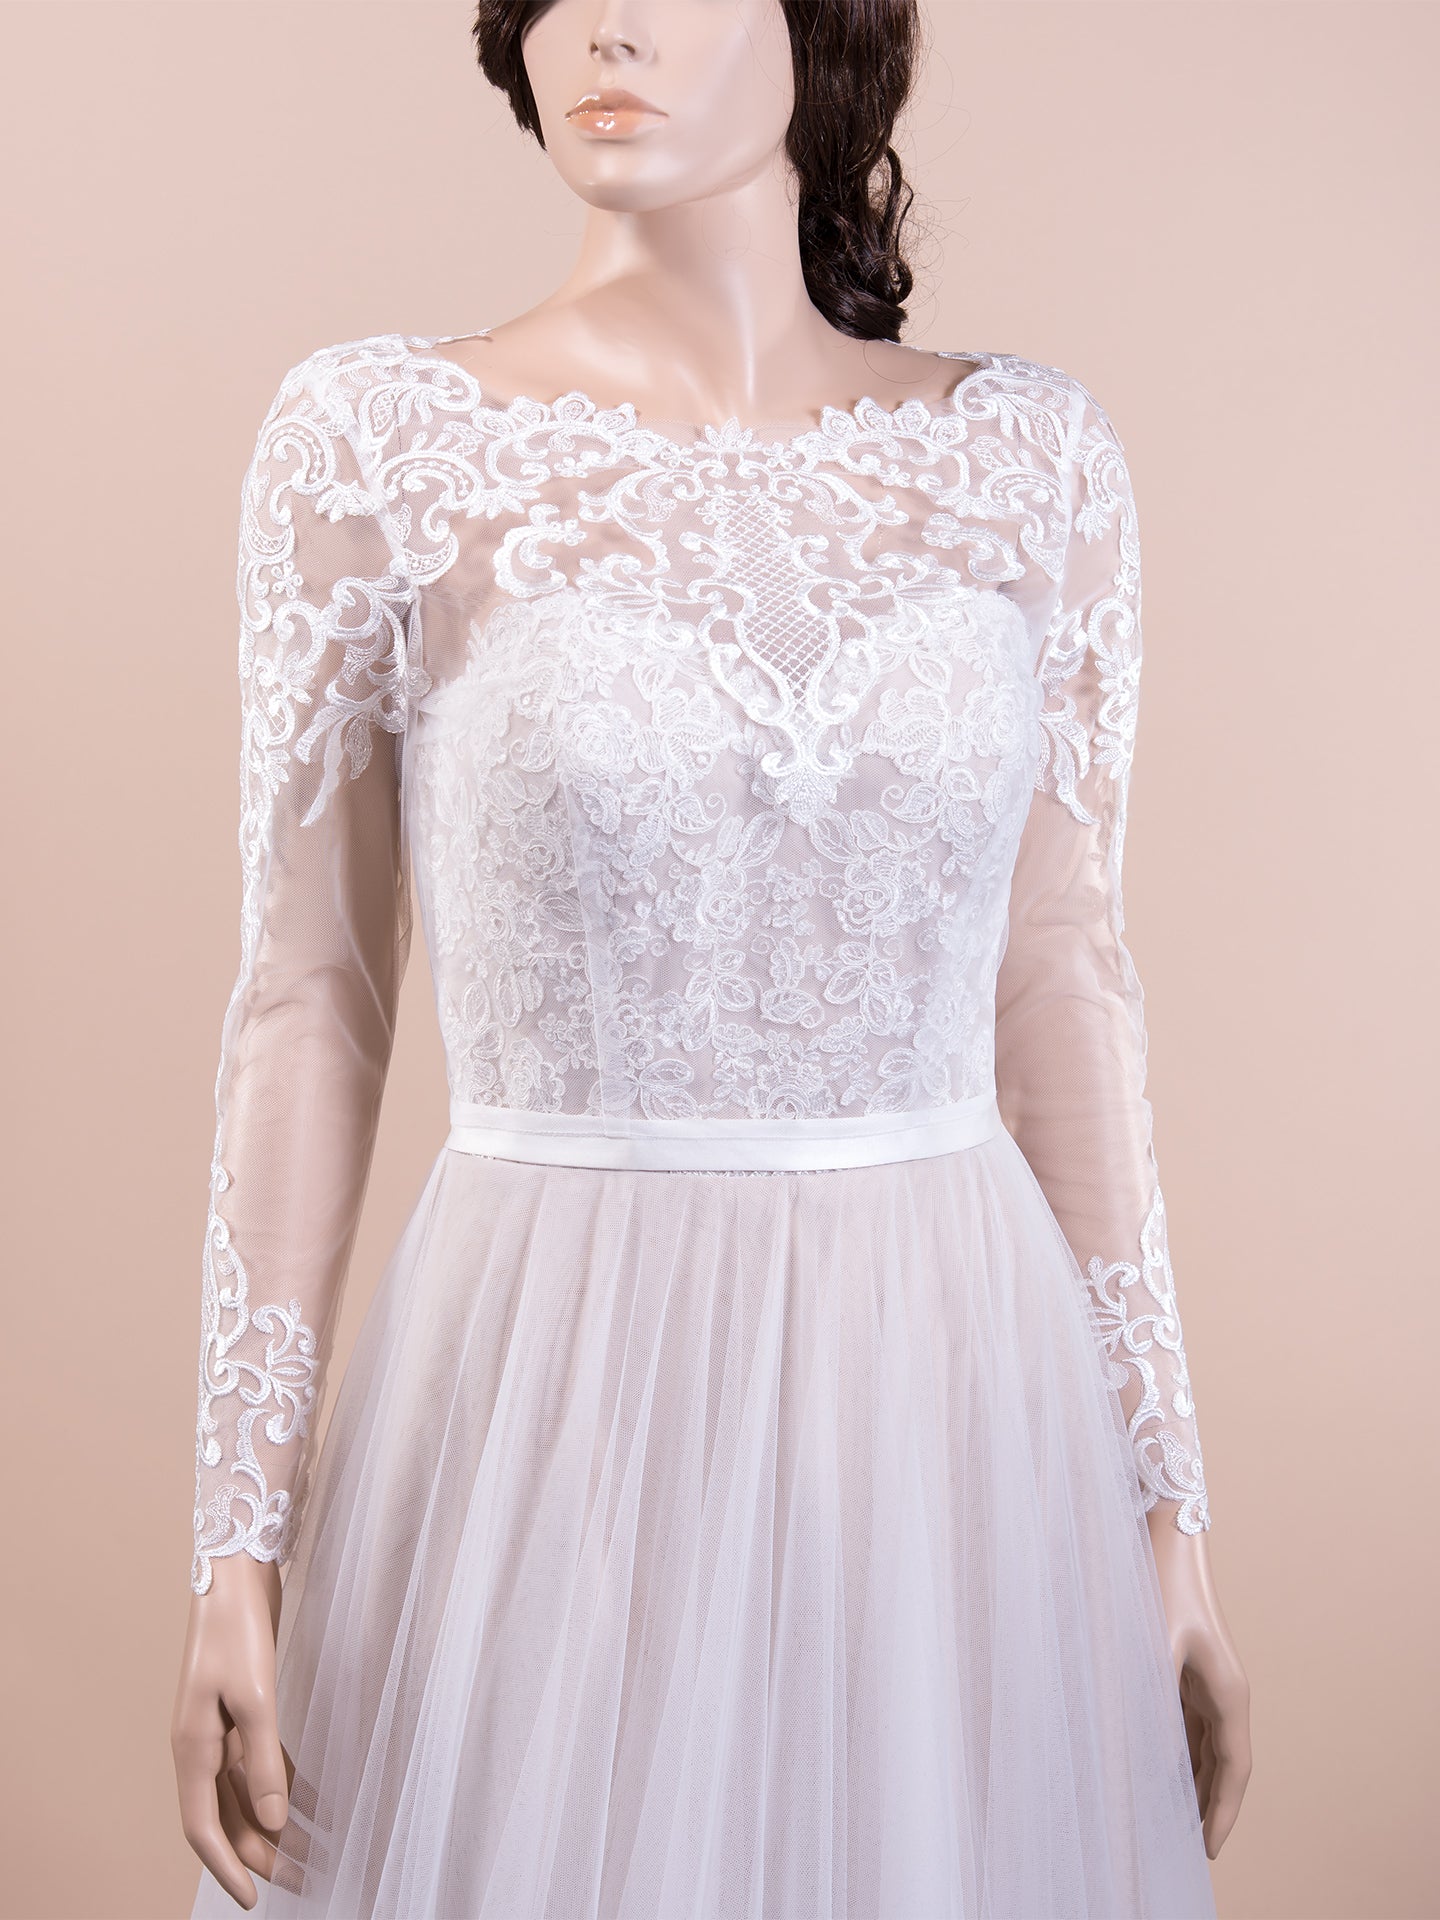 Ivory long sleeve embroidered lace wedding dress topper